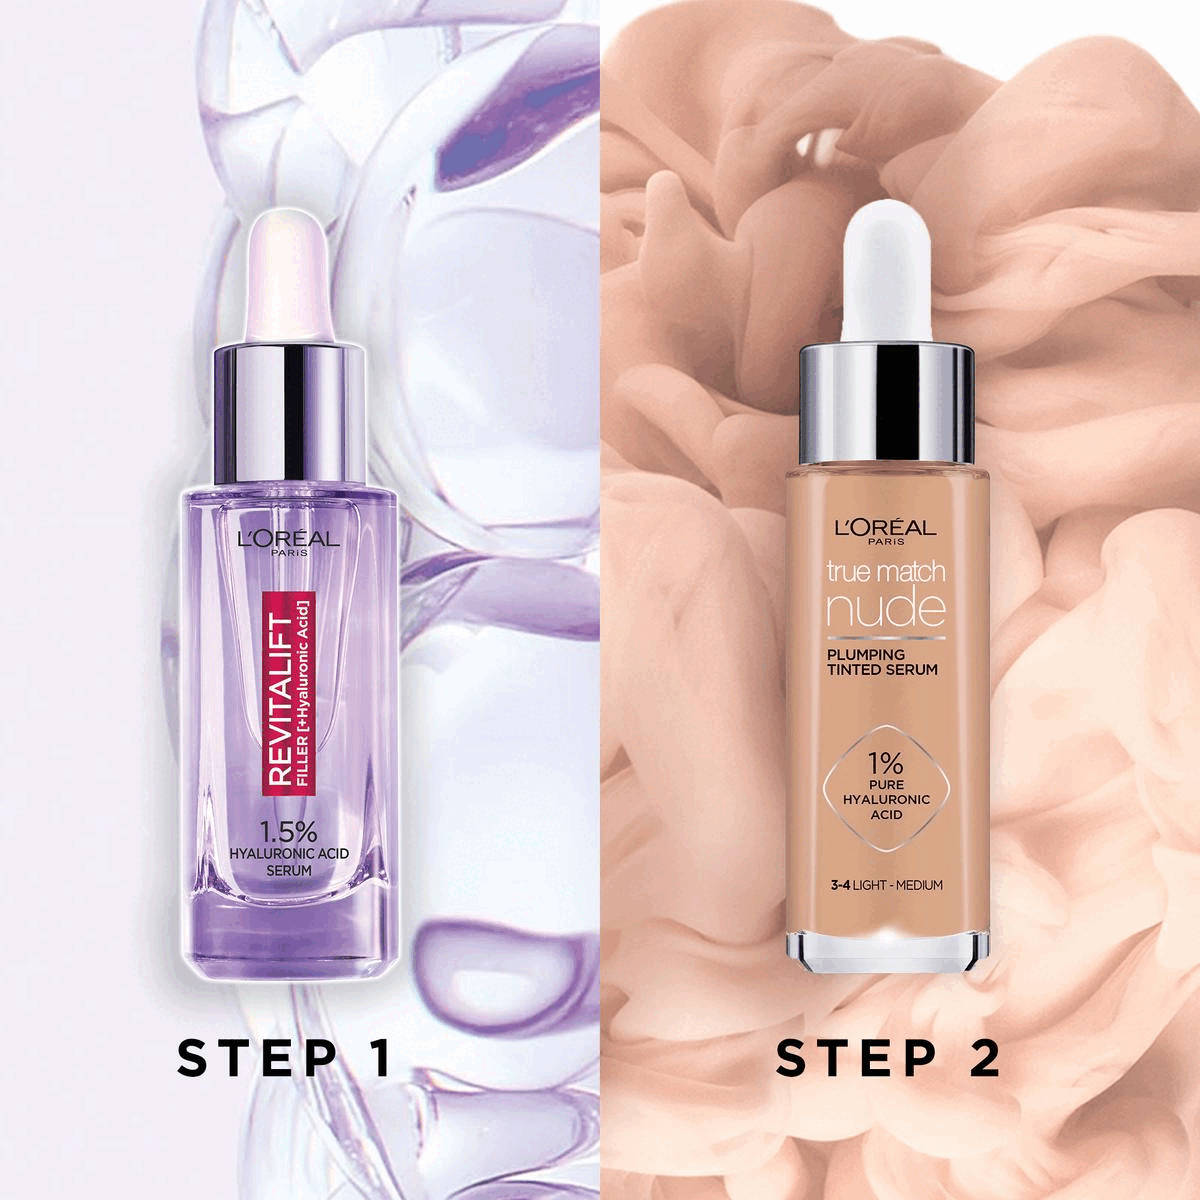 Image 1, showing the two products in the bundle, step 1, step 2 Image 2, powered by 1% hyaluronic acid for plumper looking skin Image 3, powered by 1.5% hyaluronic acid in two types, macro to act at the skins surface, micro to to boost within the epidermis Image 4, cares like a serum, covers like a foundation